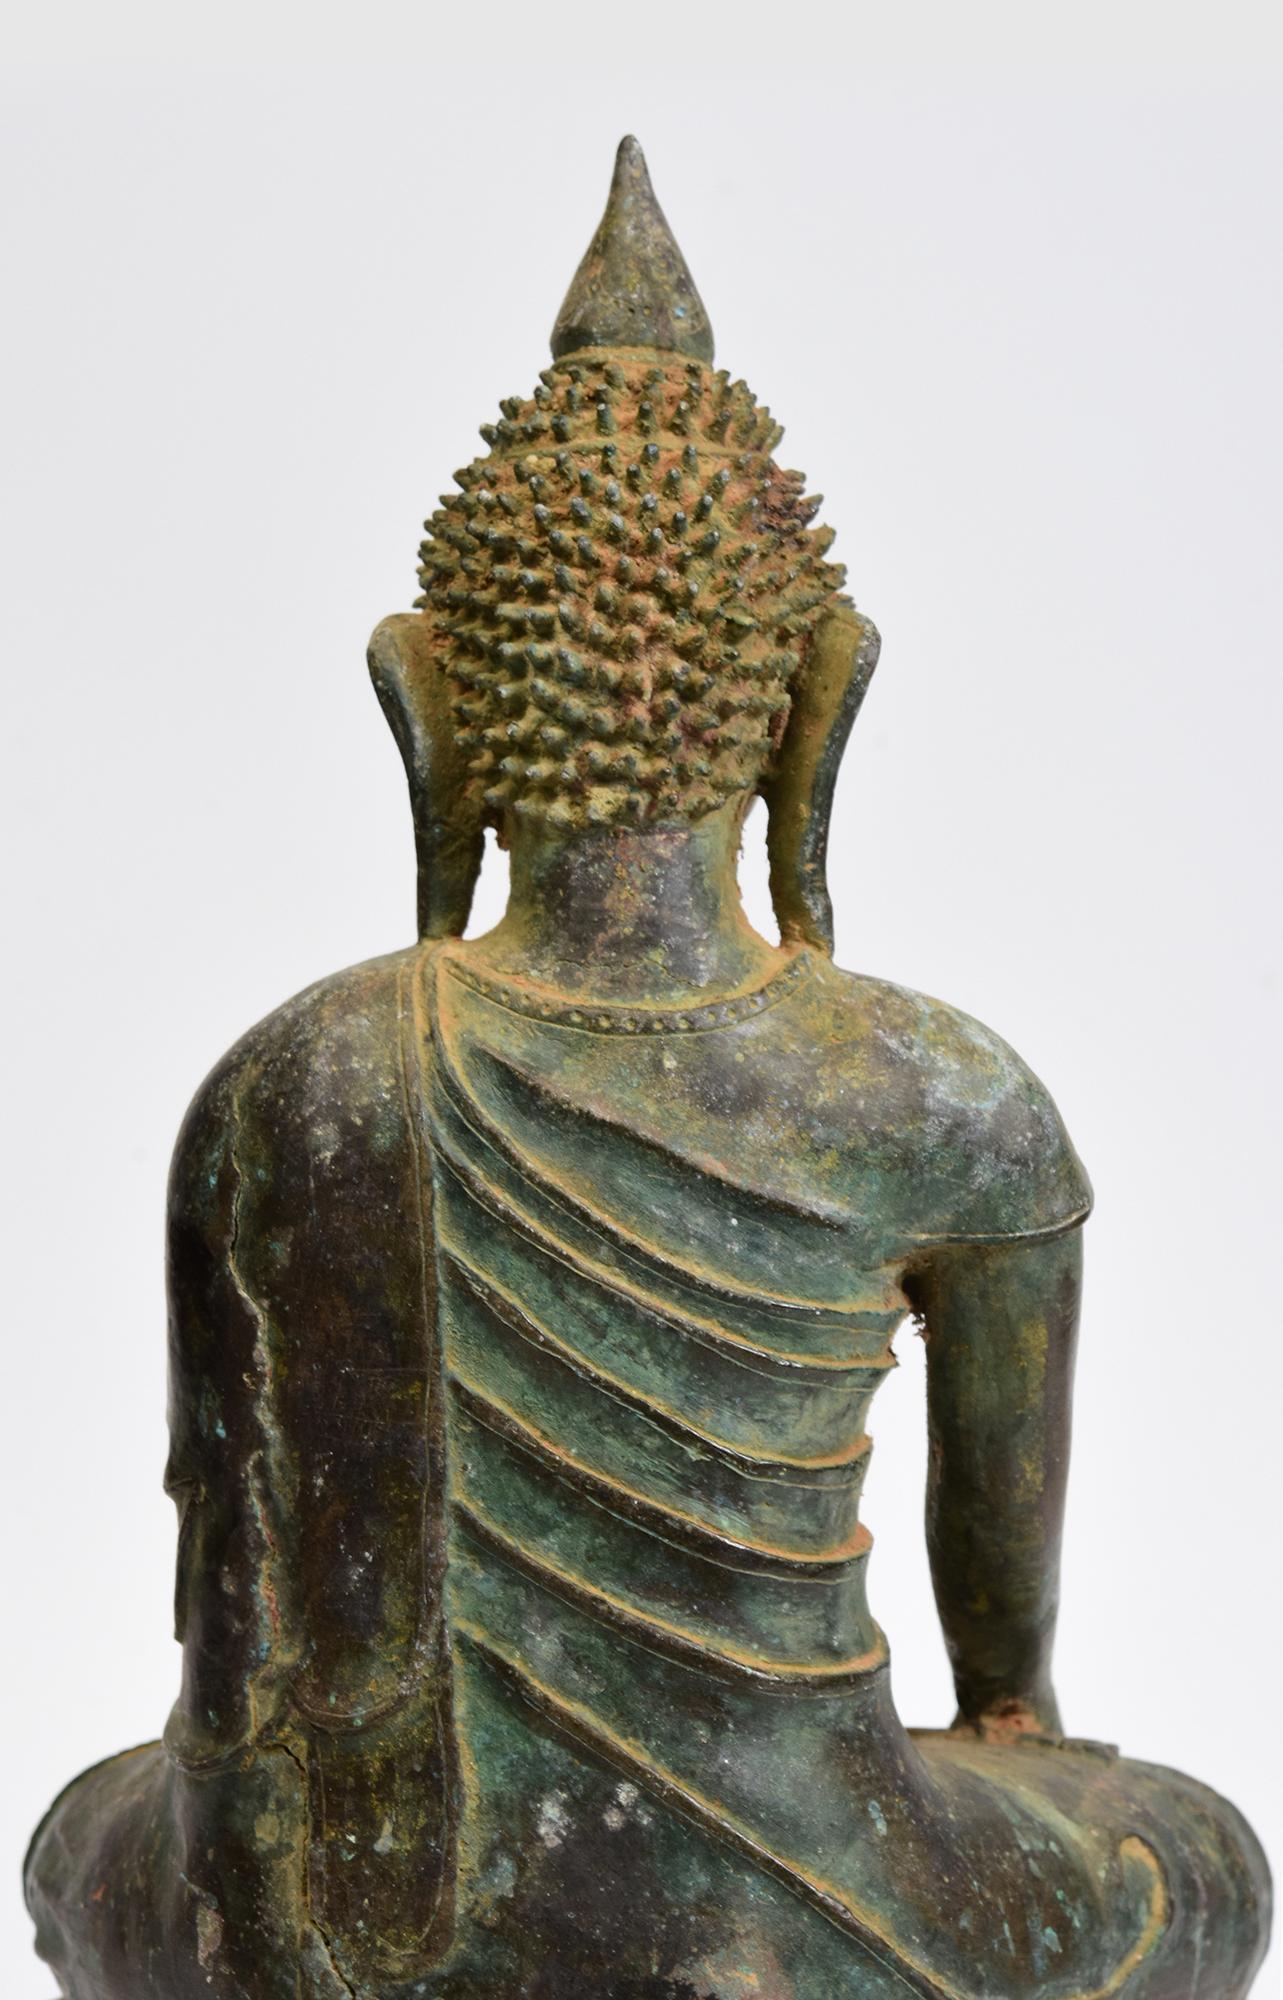 17th Century, Early Shan, Rare Antique Burmese Bronze Seated Buddha For Sale 4